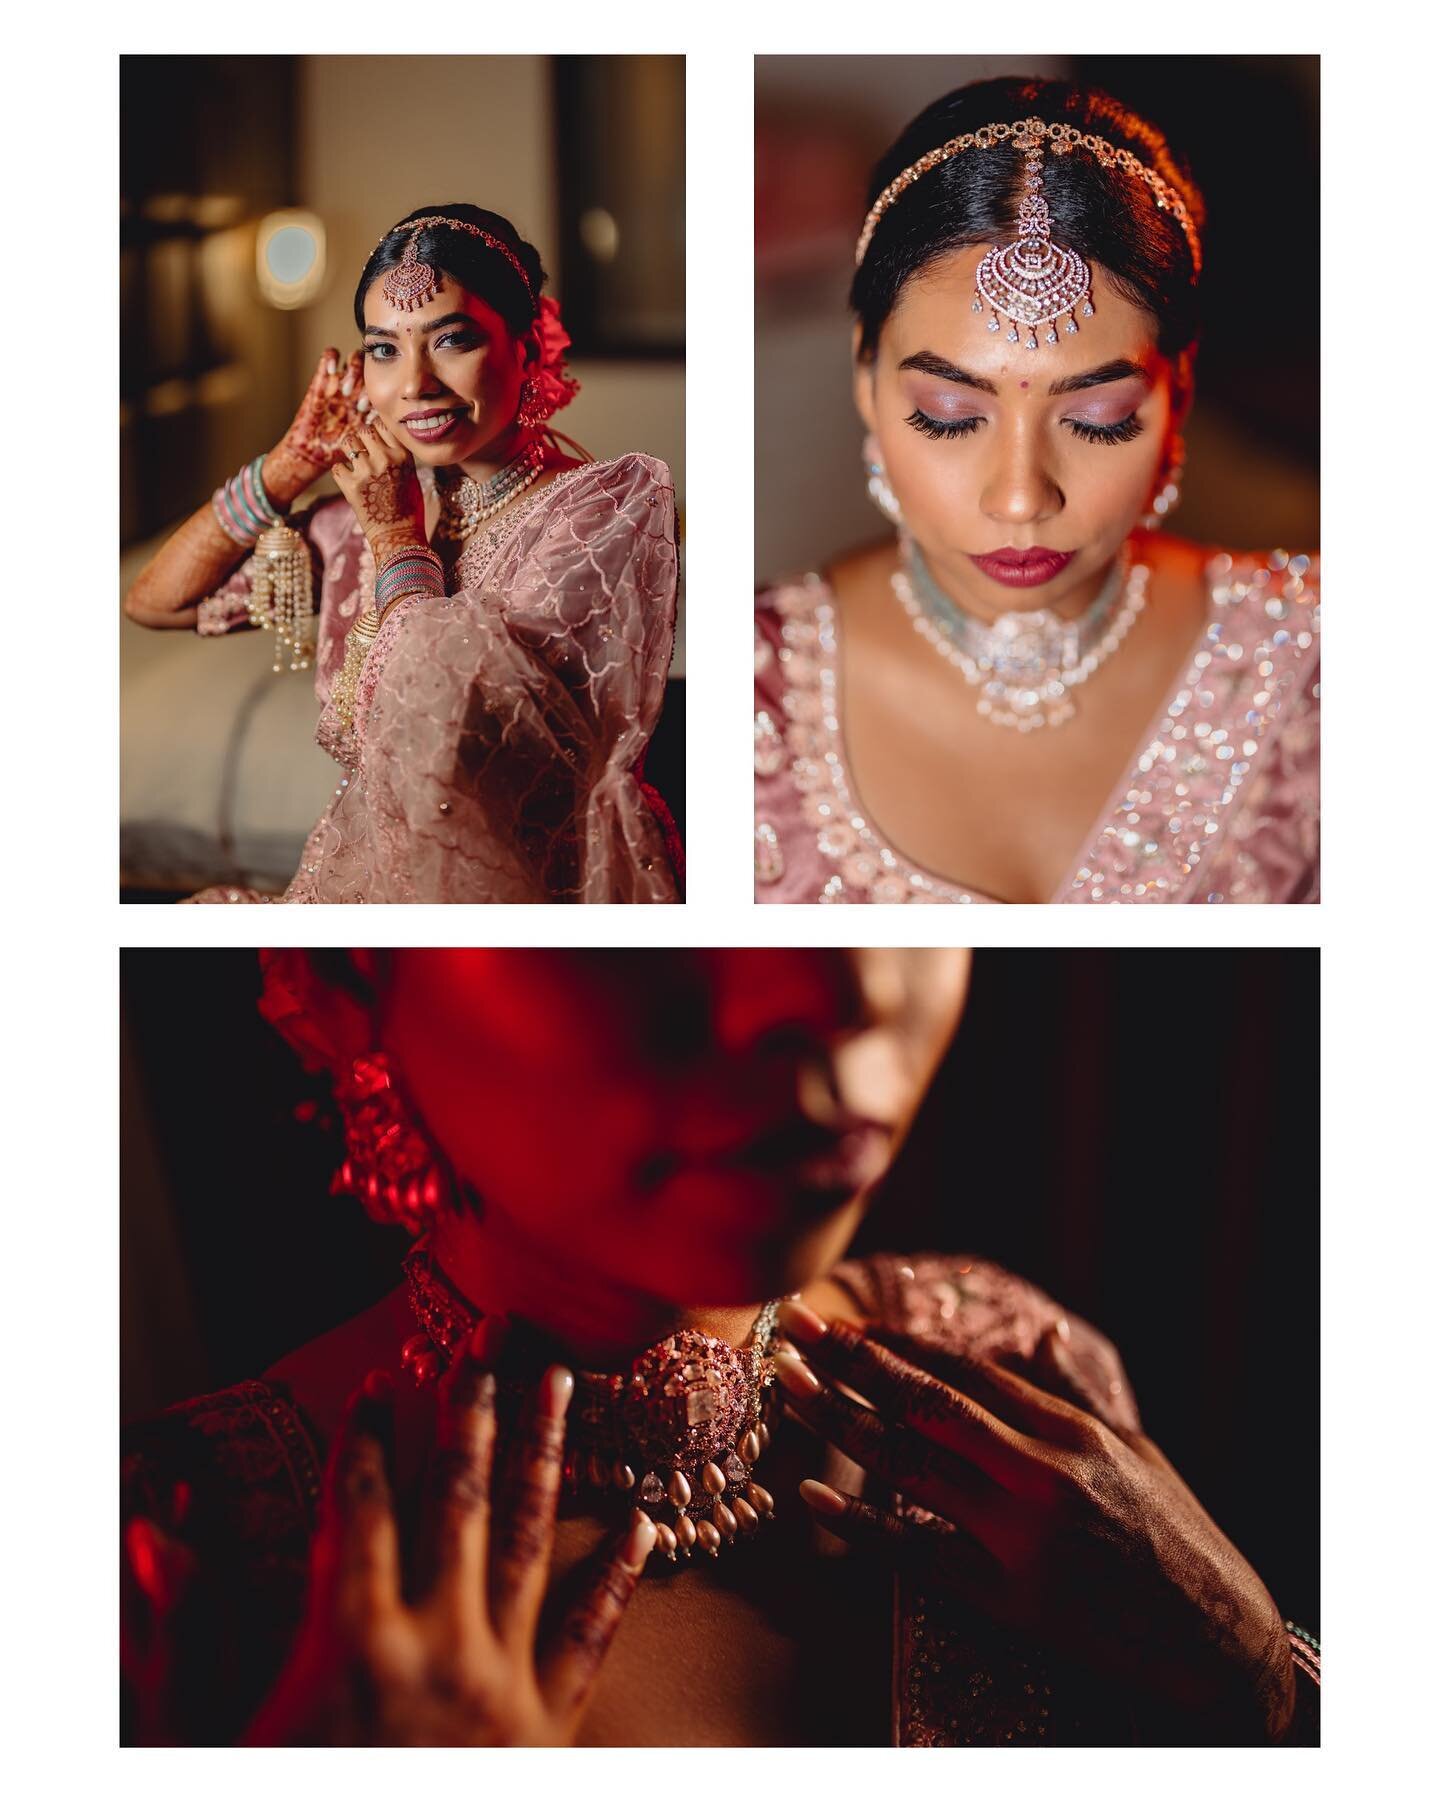 She tot she fell for him but no! He raised her with love and respect!
.

In frame:
Bride: @_khushi_20___ 
Groom: @kunal.kunal1 
.
Weddings by: @dreamstrokesdecor 
Venue: @holidayvillageblr.resort 
.
Capturing emotions @myshutterclicksphotography 
.
.